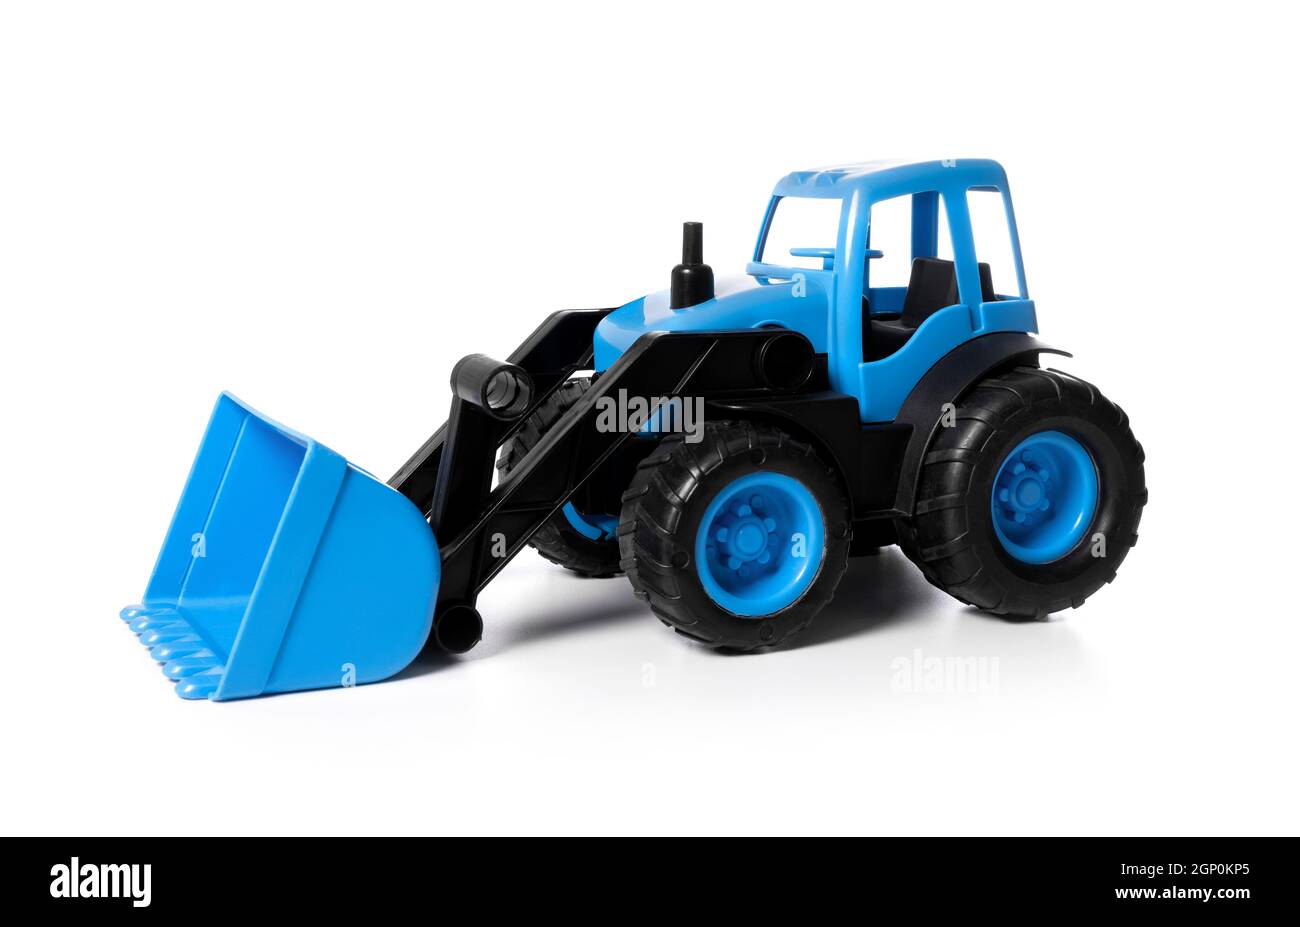 plastic toy tractor isolated on white background Stock Photo